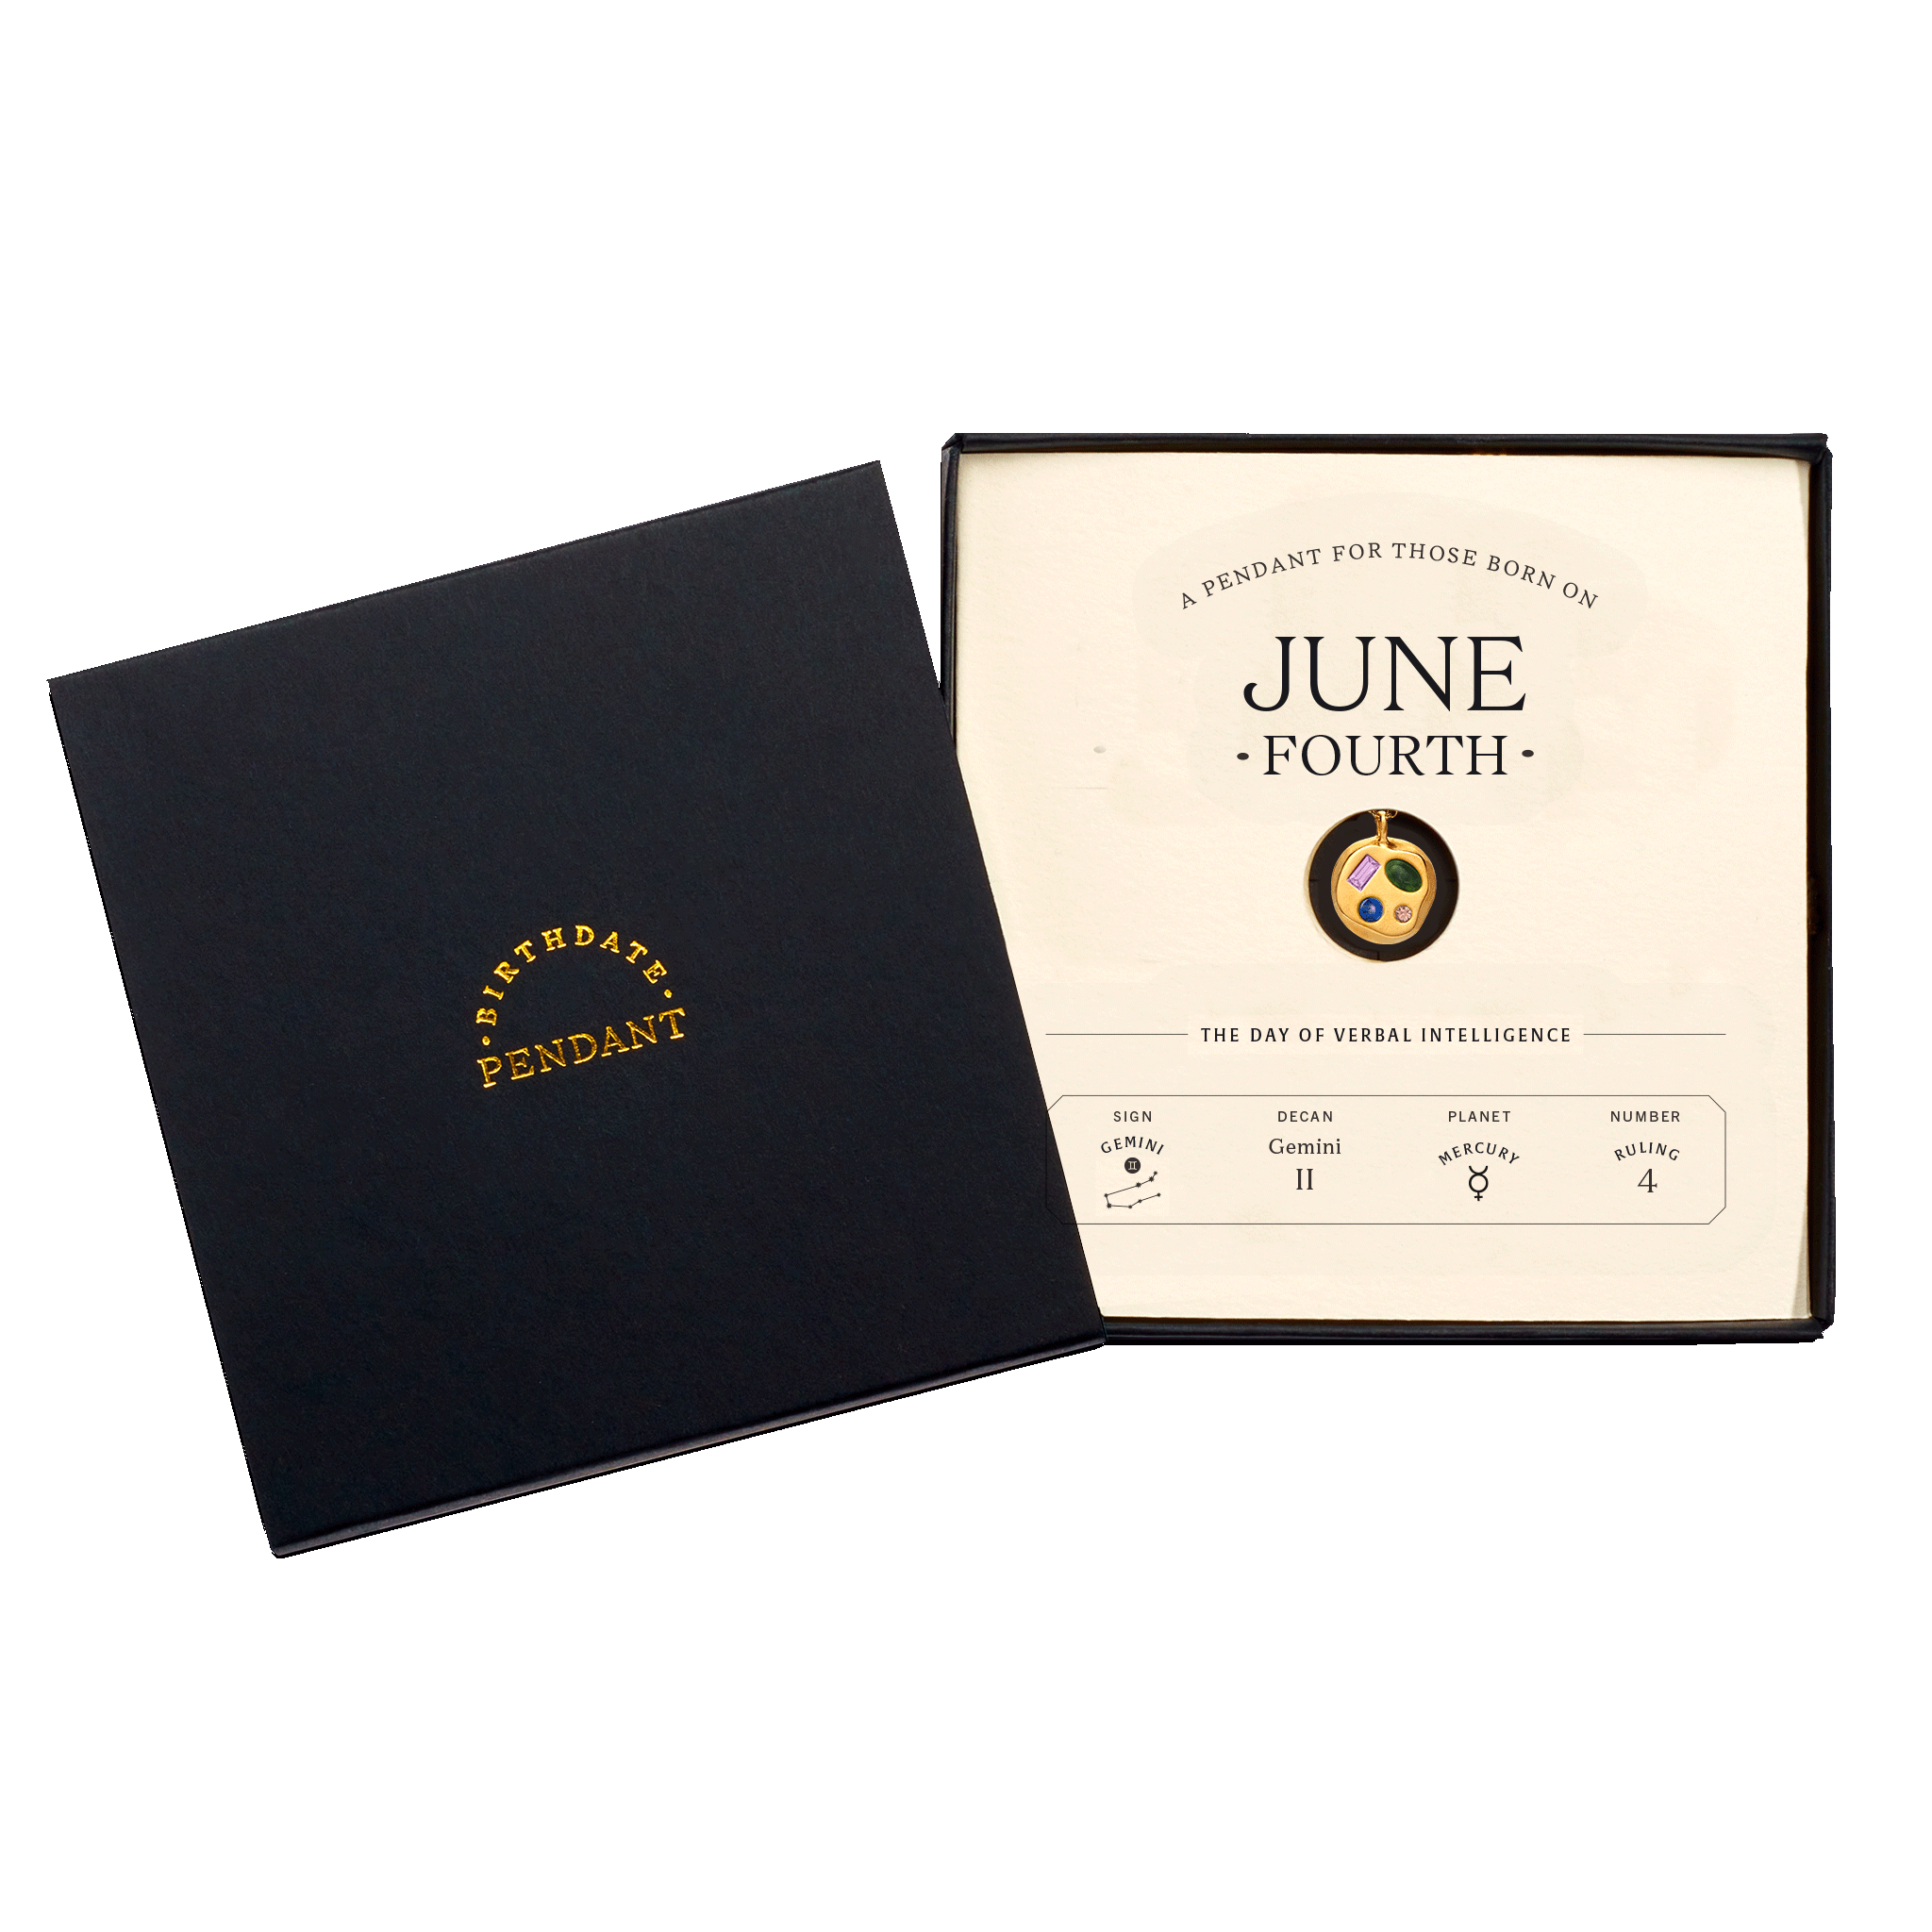 The June Fourth Pendant inside its box